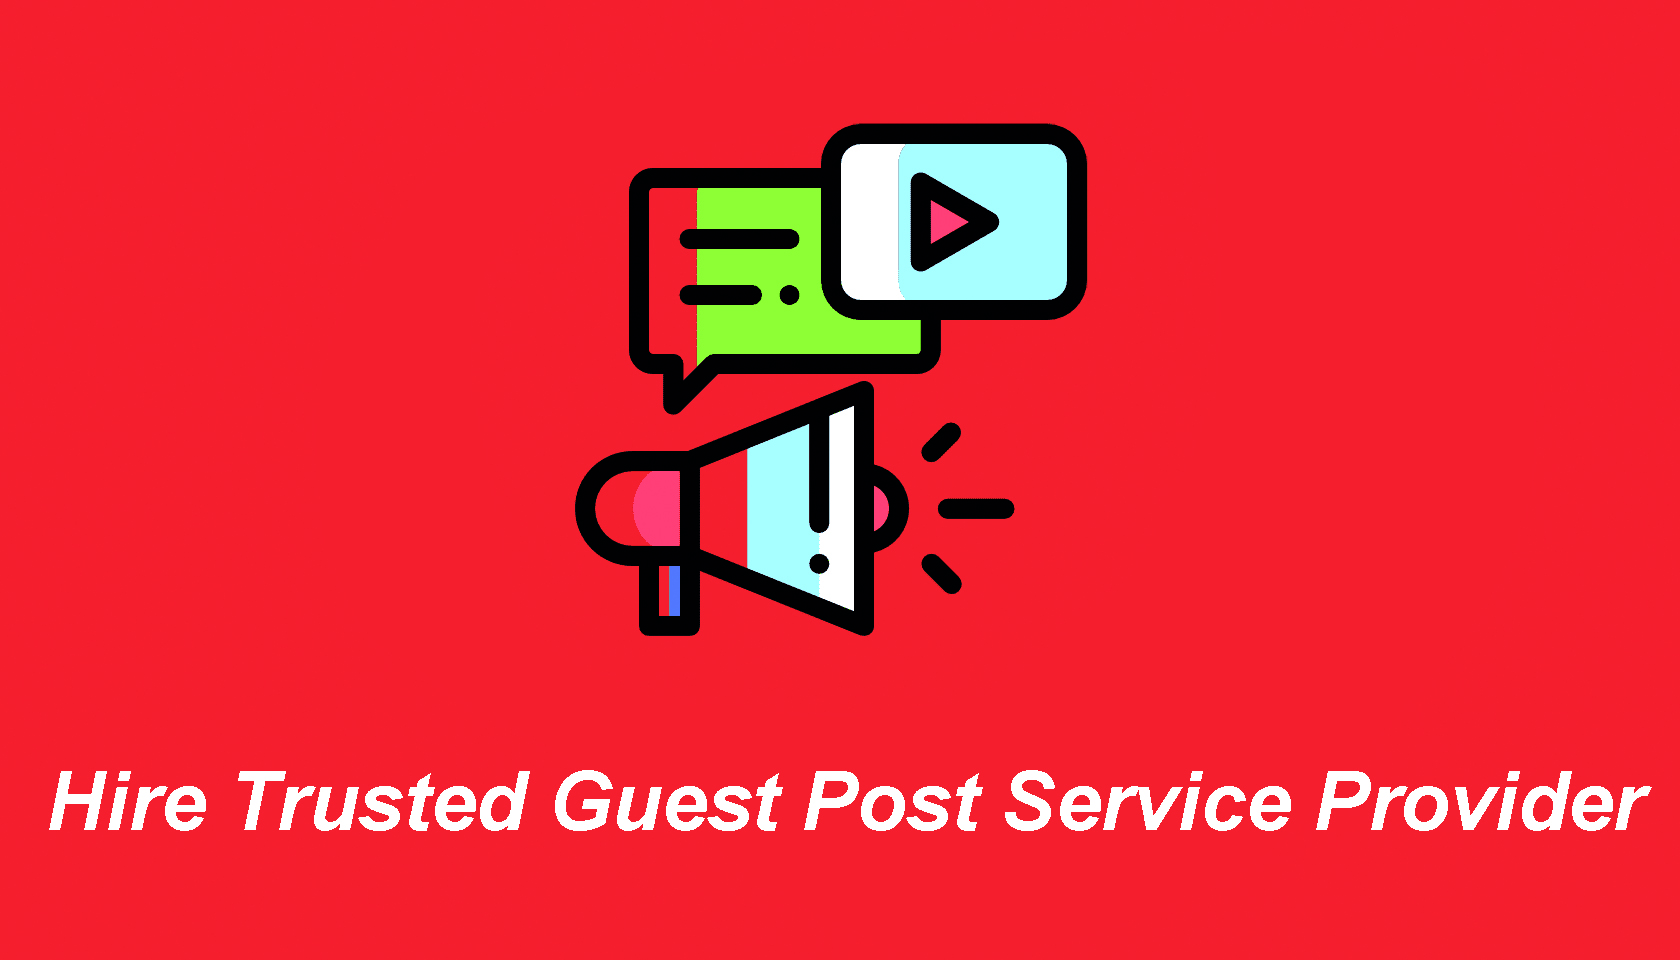 Hire Trusted Guest Post Service Provider